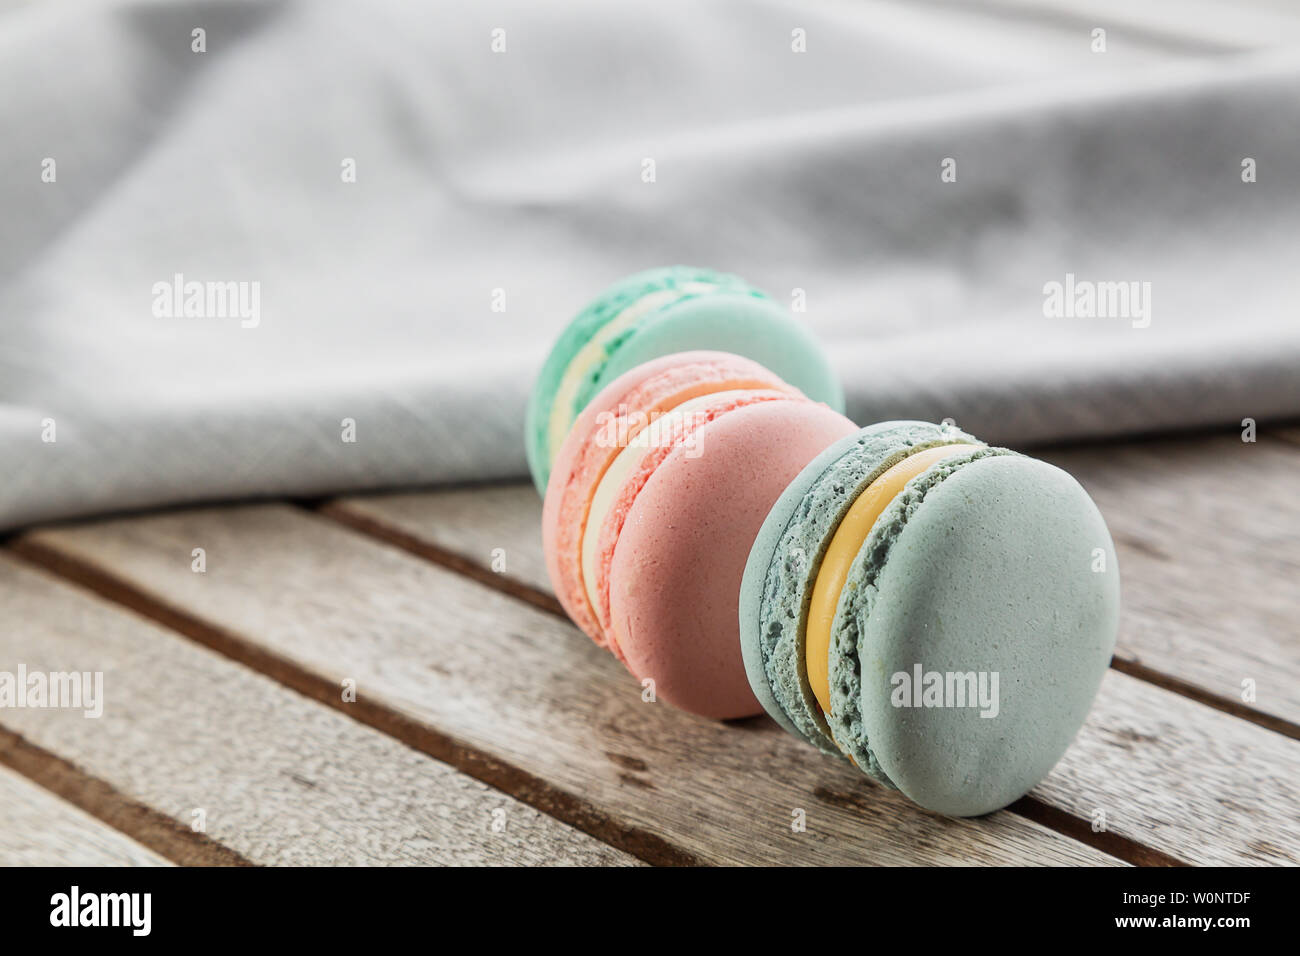 Close up colorful macarons dessert with vintage pastel tones Stock Photo